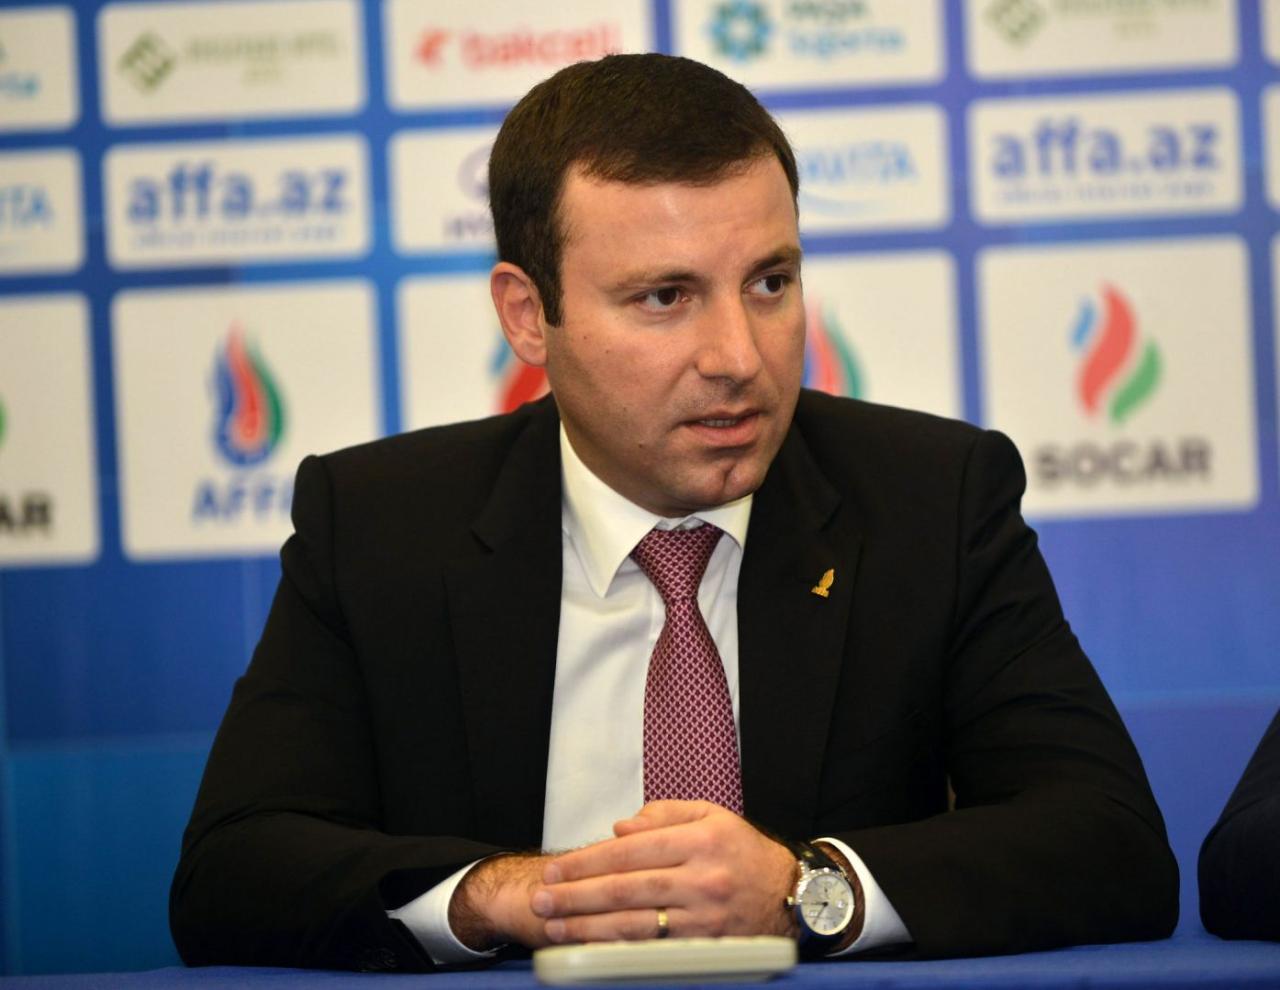 FIFA appoints Azerbaijani AFFA's official as Director Member Associations Europe